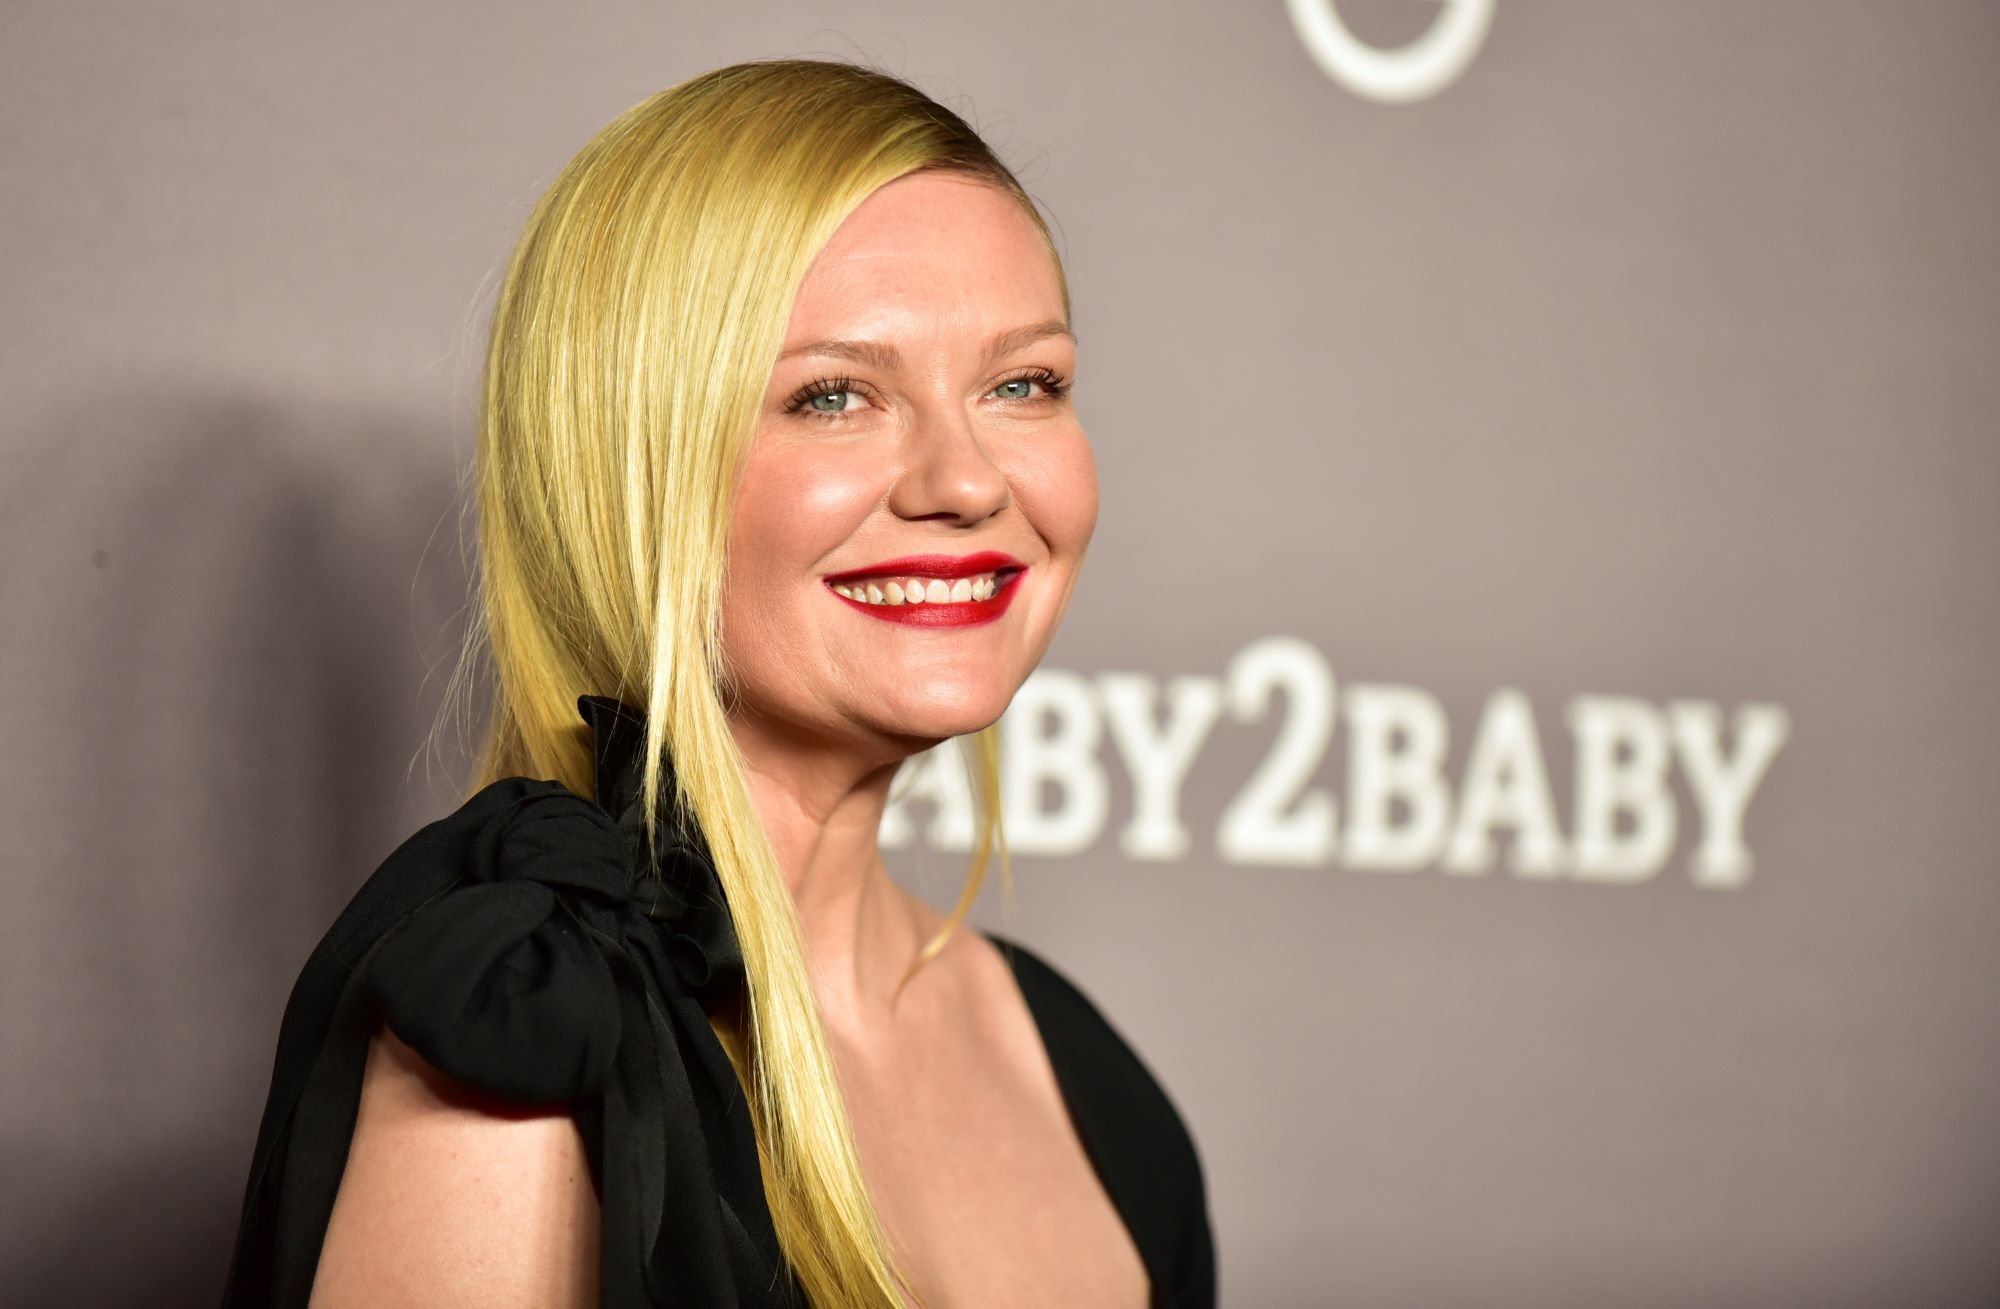 'Spider-Man' star Kirsten Dunst wears a black dress that ties in a bow on her shoulder.